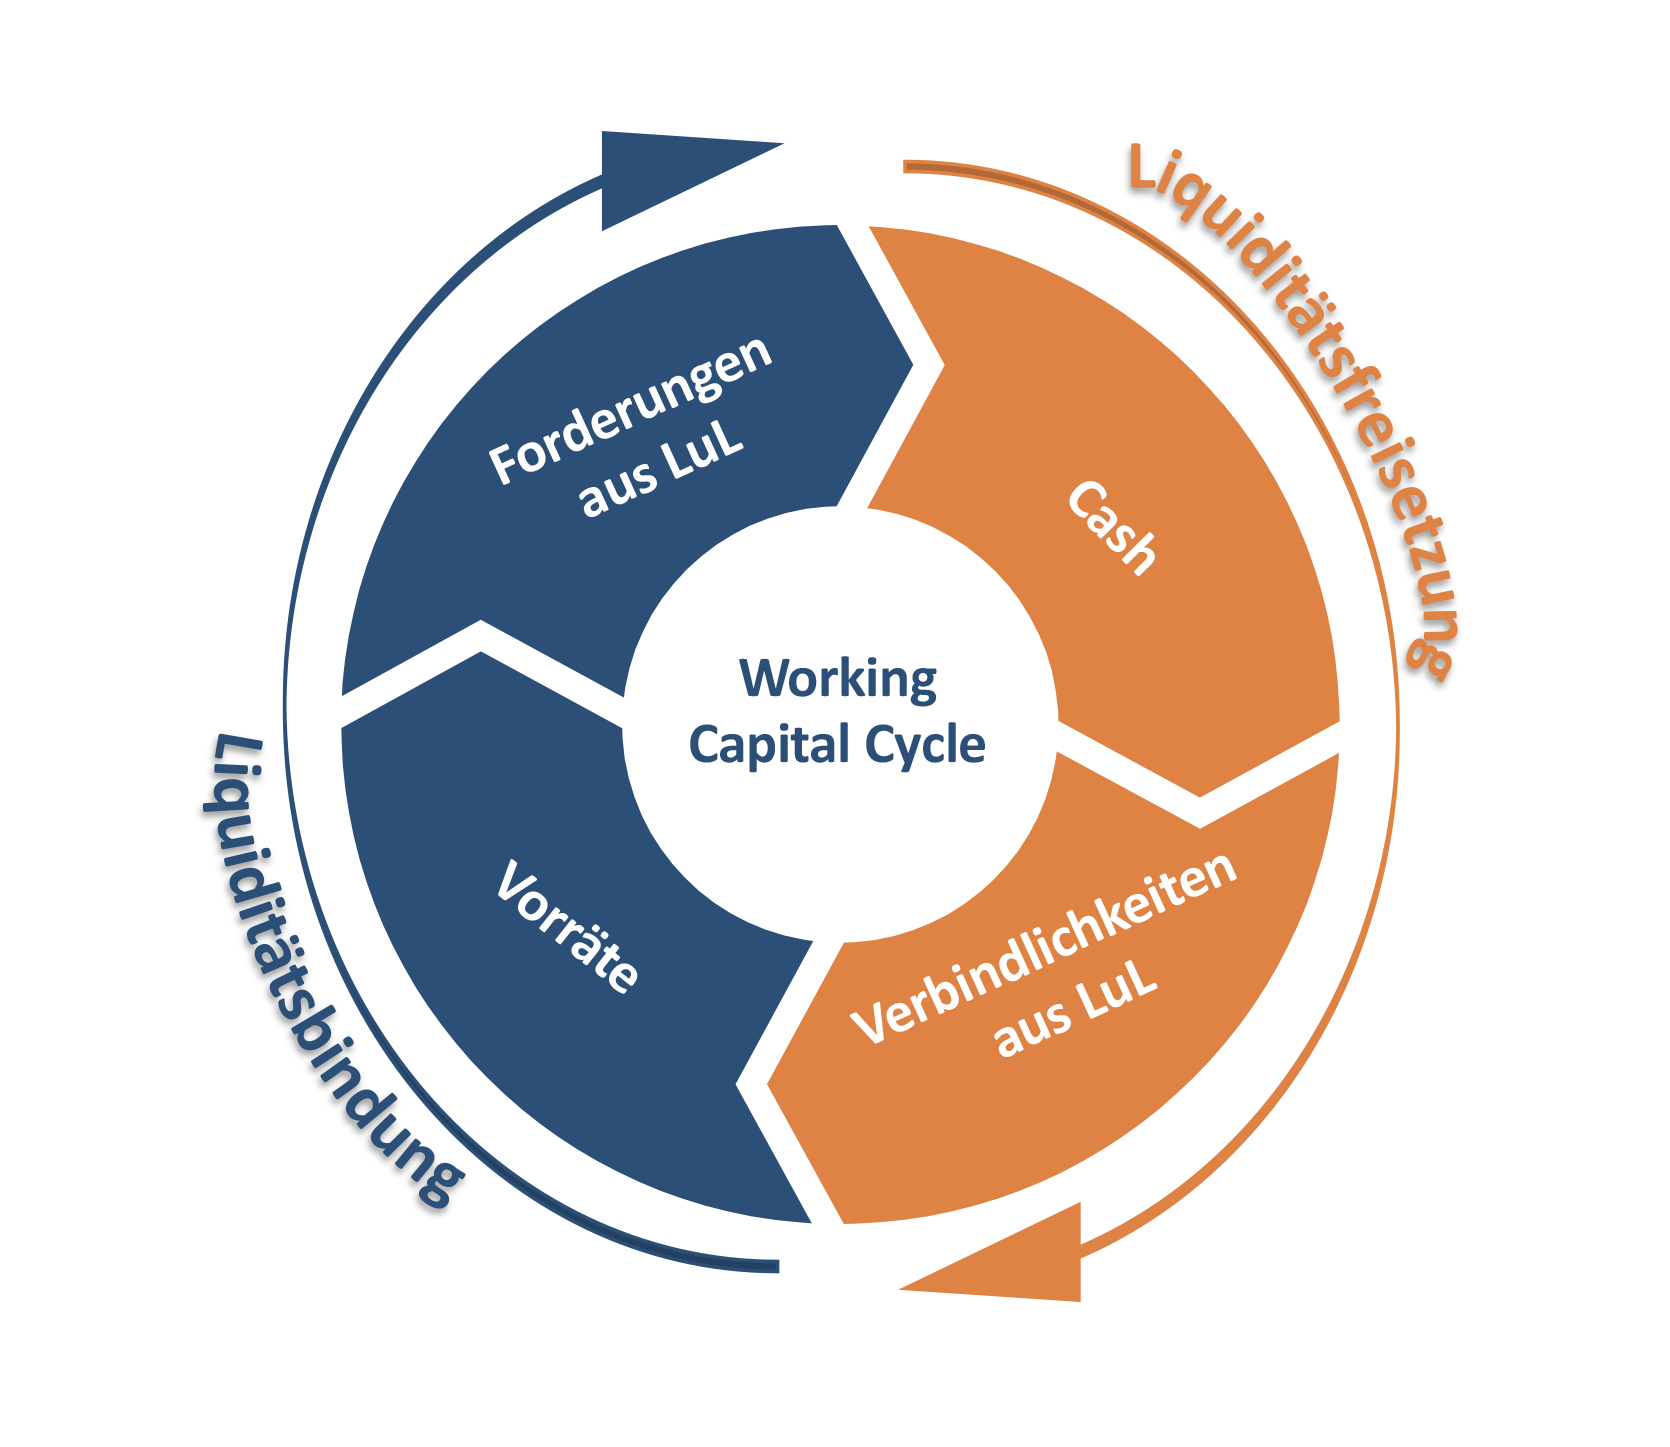 Working Capital Management - Working Capital Cycle